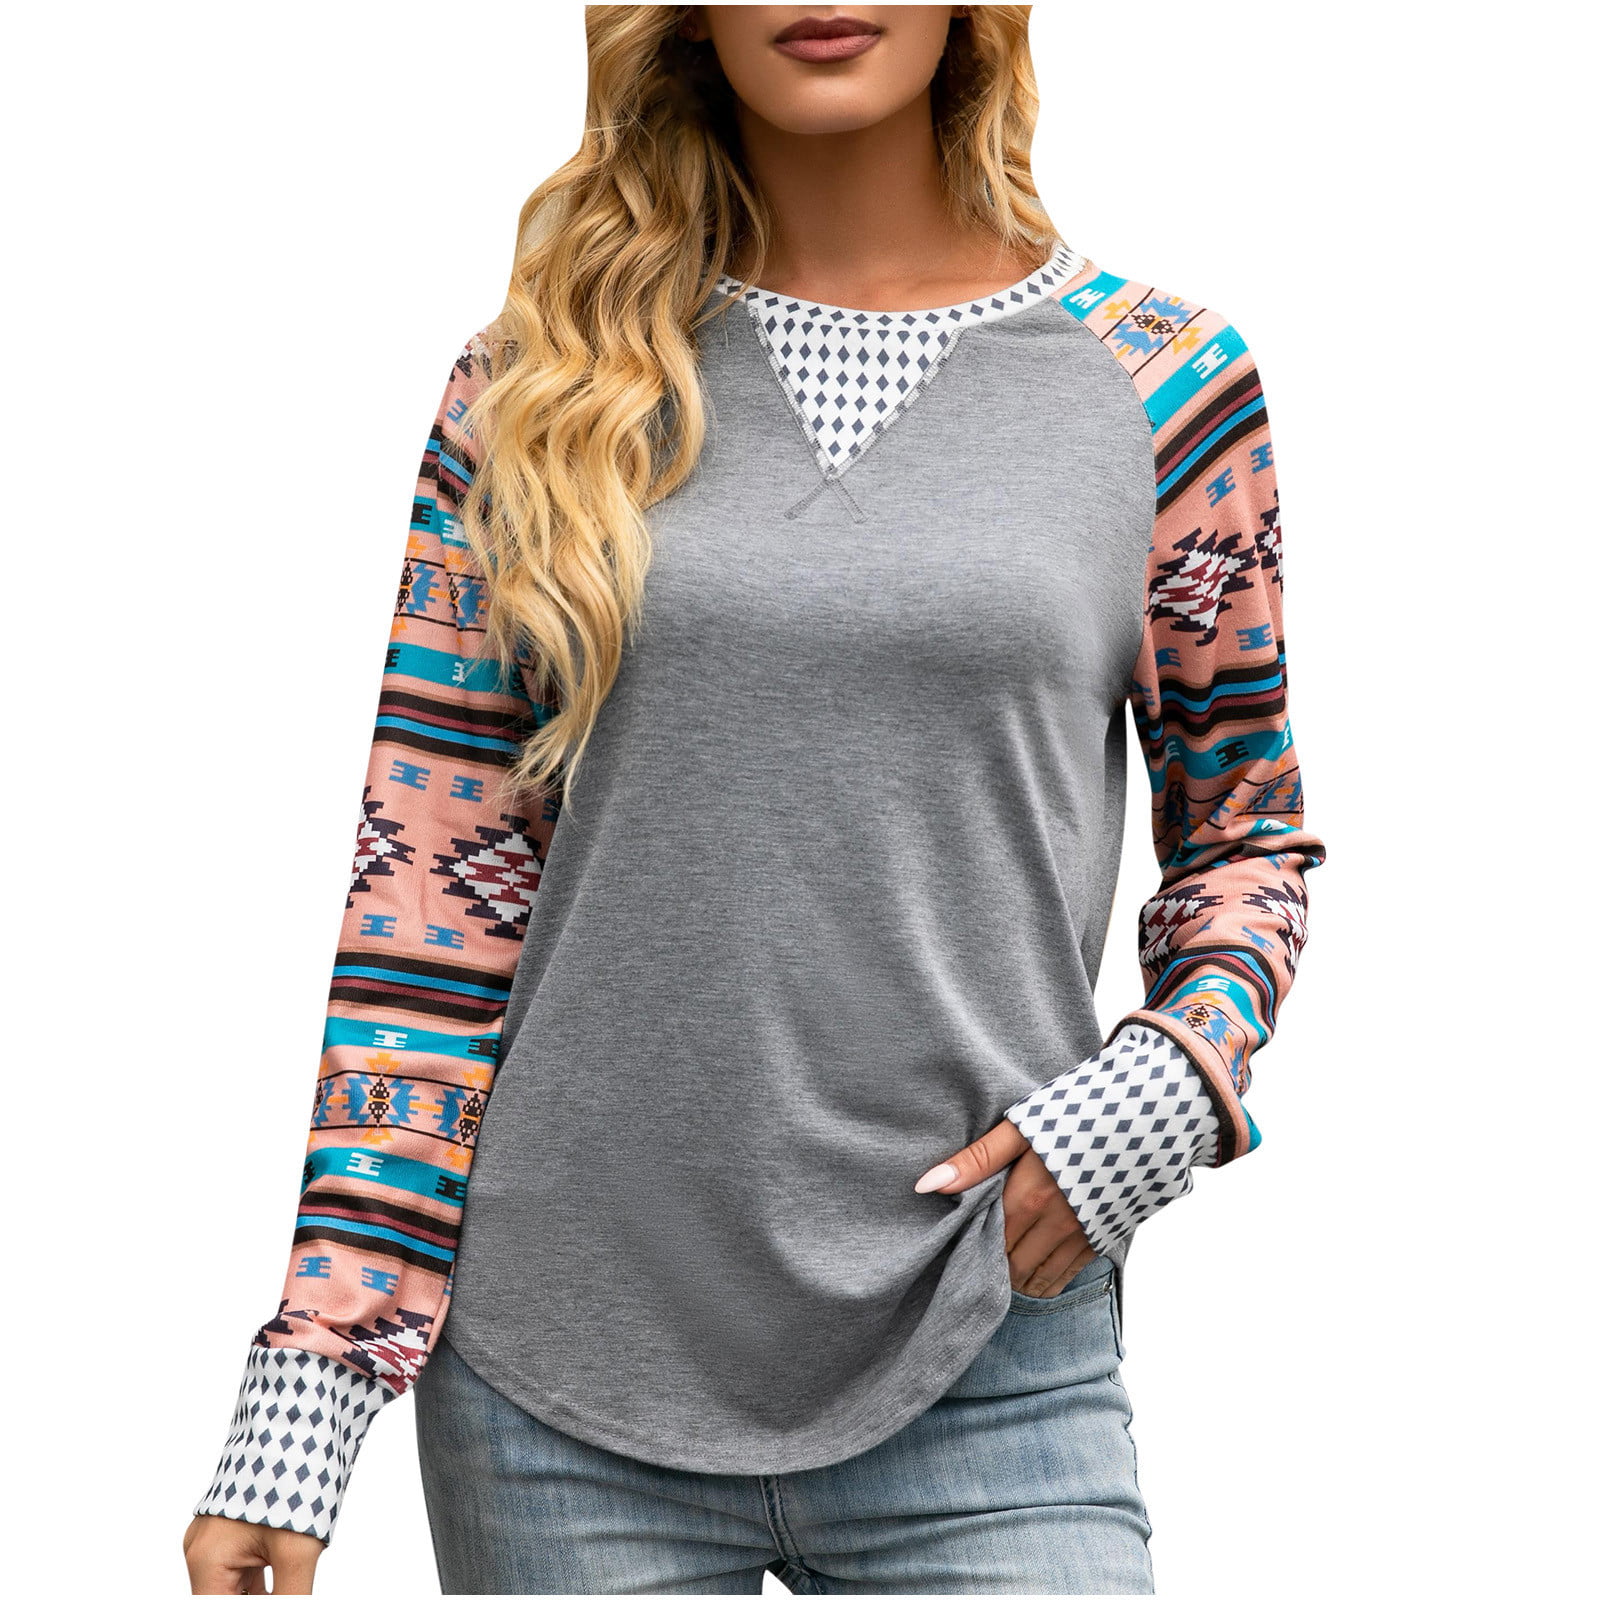 QIUUE Women Comfy Scarf Collar Sweatshirt Long Sleeve Leopard Patchwork T-Shirt Tops Ladies Blouse Pullover Casual Tunic S-XL 